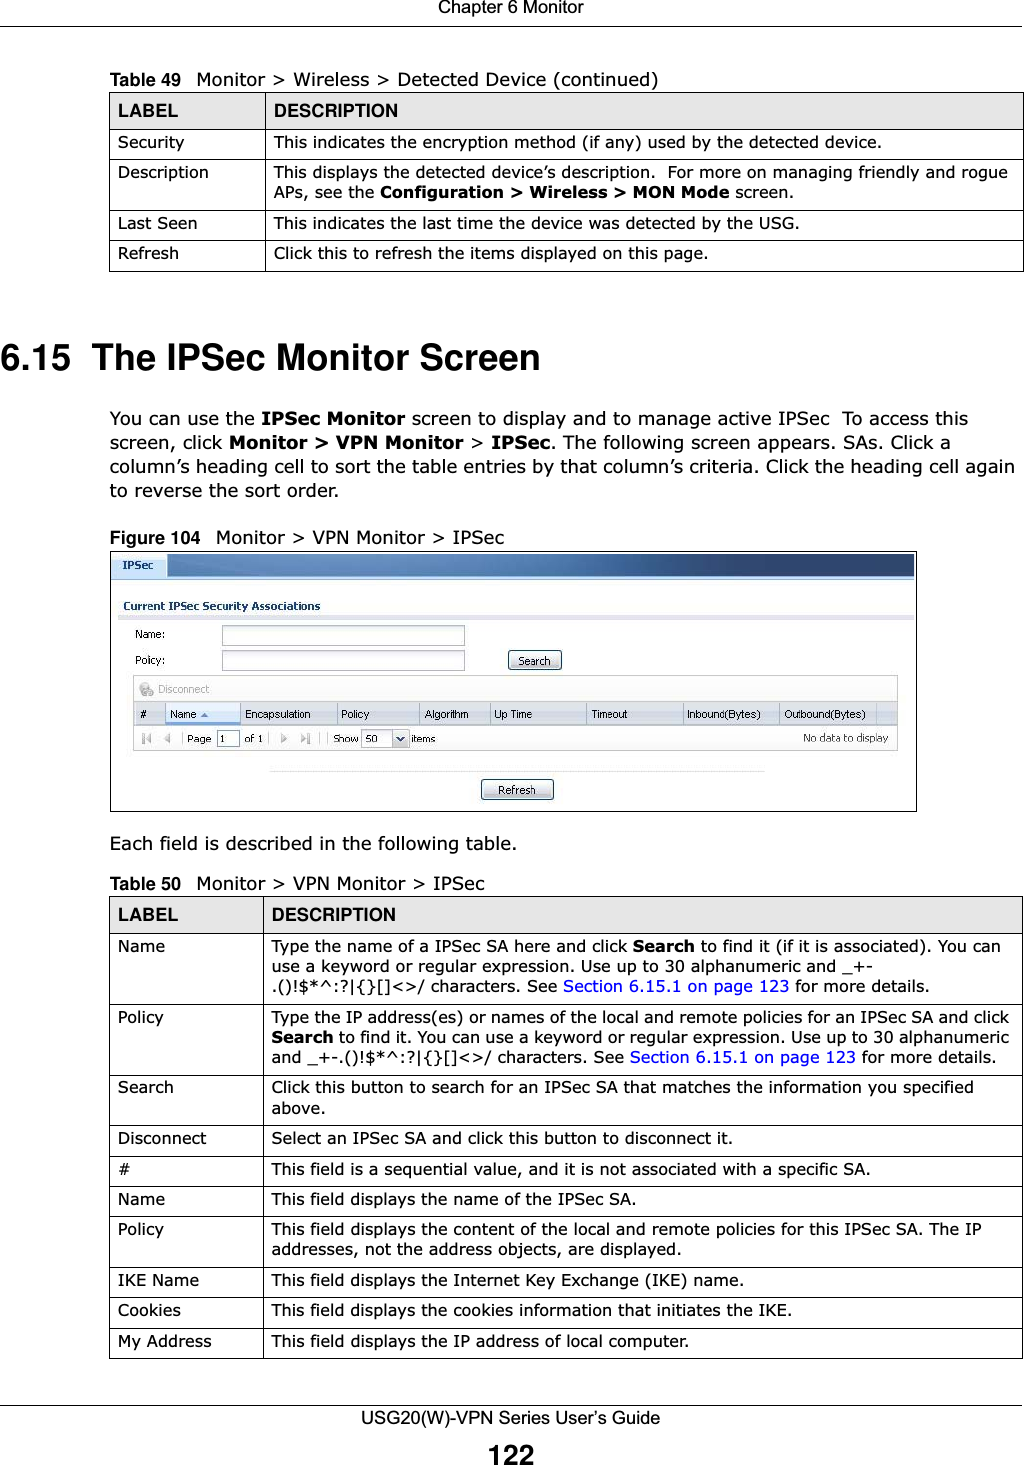 Chapter 6 MonitorUSG20(W)-VPN Series User’s Guide1226.15  The IPSec Monitor ScreenYou can use the IPSec Monitor screen to display and to manage active IPSec  To access this screen, click Monitor &gt; VPN Monitor &gt; IPSec. The following screen appears. SAs. Click a column’s heading cell to sort the table entries by that column’s criteria. Click the heading cell again to reverse the sort order.Figure 104   Monitor &gt; VPN Monitor &gt; IPSecEach field is described in the following table. Security This indicates the encryption method (if any) used by the detected device.Description This displays the detected device’s description.  For more on managing friendly and rogue APs, see the Configuration &gt; Wireless &gt; MON Mode screen.Last Seen This indicates the last time the device was detected by the USG.Refresh Click this to refresh the items displayed on this page.Table 49   Monitor &gt; Wireless &gt; Detected Device (continued)LABEL DESCRIPTIONTable 50   Monitor &gt; VPN Monitor &gt; IPSecLABEL DESCRIPTIONName Type the name of a IPSec SA here and click Search to find it (if it is associated). You can use a keyword or regular expression. Use up to 30 alphanumeric and _+-.()!$*^:?|{}[]&lt;&gt;/ characters. See Section 6.15.1 on page 123 for more details. Policy Type the IP address(es) or names of the local and remote policies for an IPSec SA and click Search to find it. You can use a keyword or regular expression. Use up to 30 alphanumeric and _+-.()!$*^:?|{}[]&lt;&gt;/ characters. See Section 6.15.1 on page 123 for more details. Search Click this button to search for an IPSec SA that matches the information you specified above.Disconnect Select an IPSec SA and click this button to disconnect it.# This field is a sequential value, and it is not associated with a specific SA.Name This field displays the name of the IPSec SA.Policy This field displays the content of the local and remote policies for this IPSec SA. The IP addresses, not the address objects, are displayed.IKE Name This field displays the Internet Key Exchange (IKE) name.Cookies This field displays the cookies information that initiates the IKE.My Address This field displays the IP address of local computer.